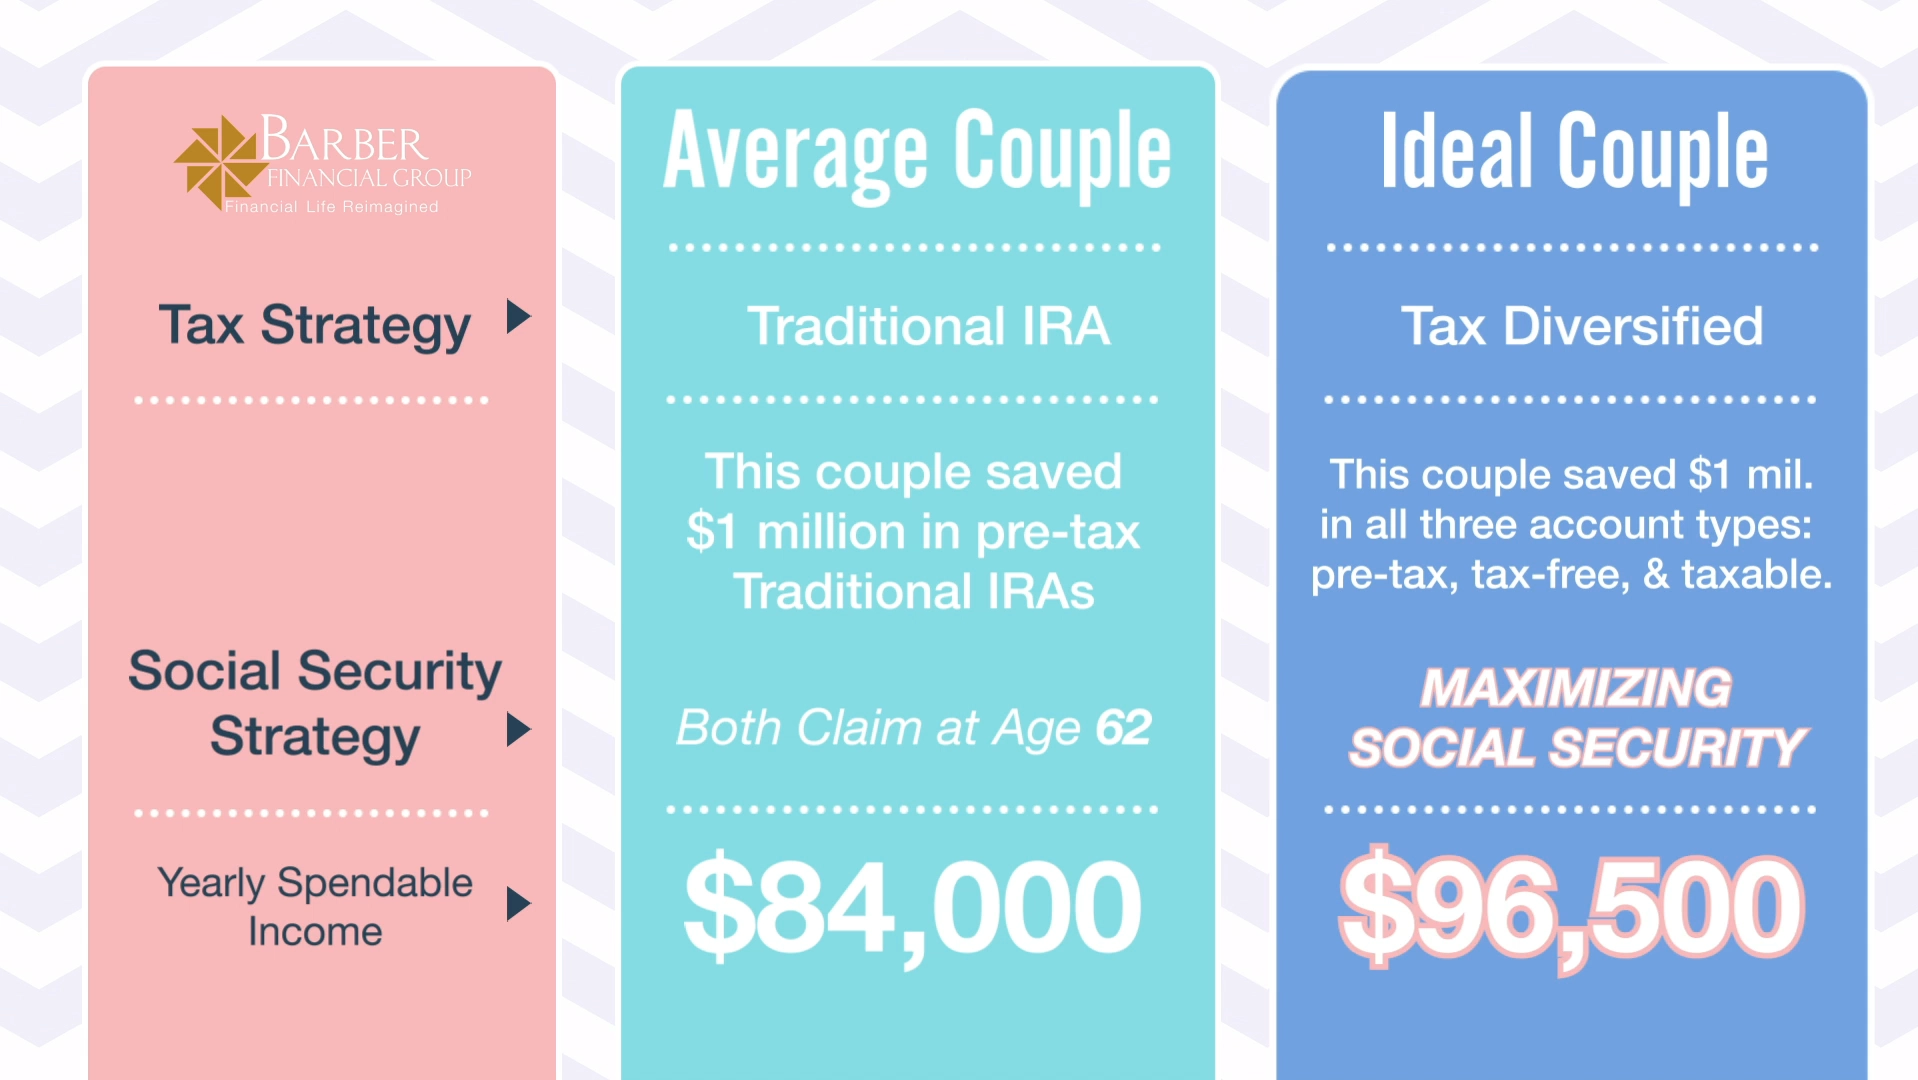 Retiring with $1 Million - Ideal Couples Yearly Income Max SS